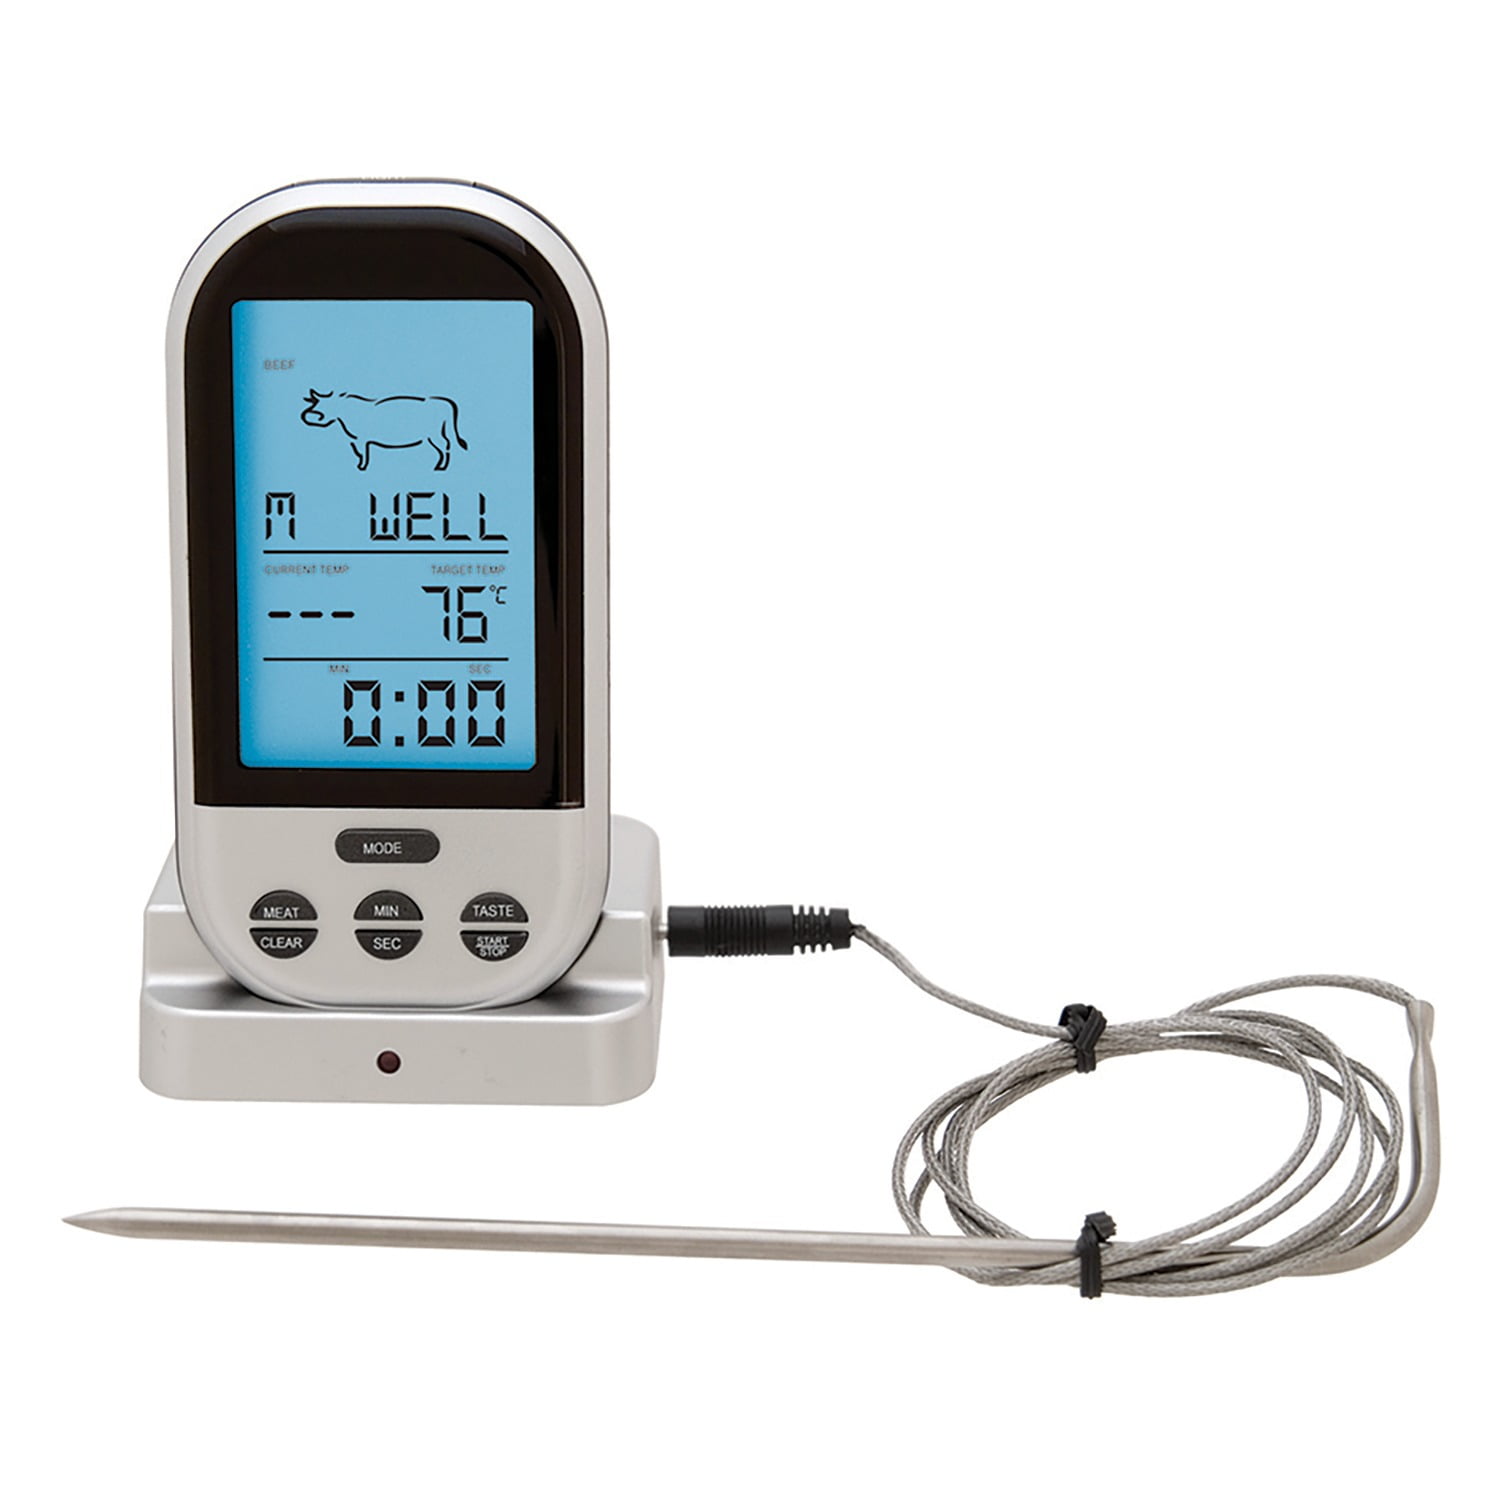 ThermoMeat™ - Wireless Meat Thermometer (Free Heat Gloves With Your Order)